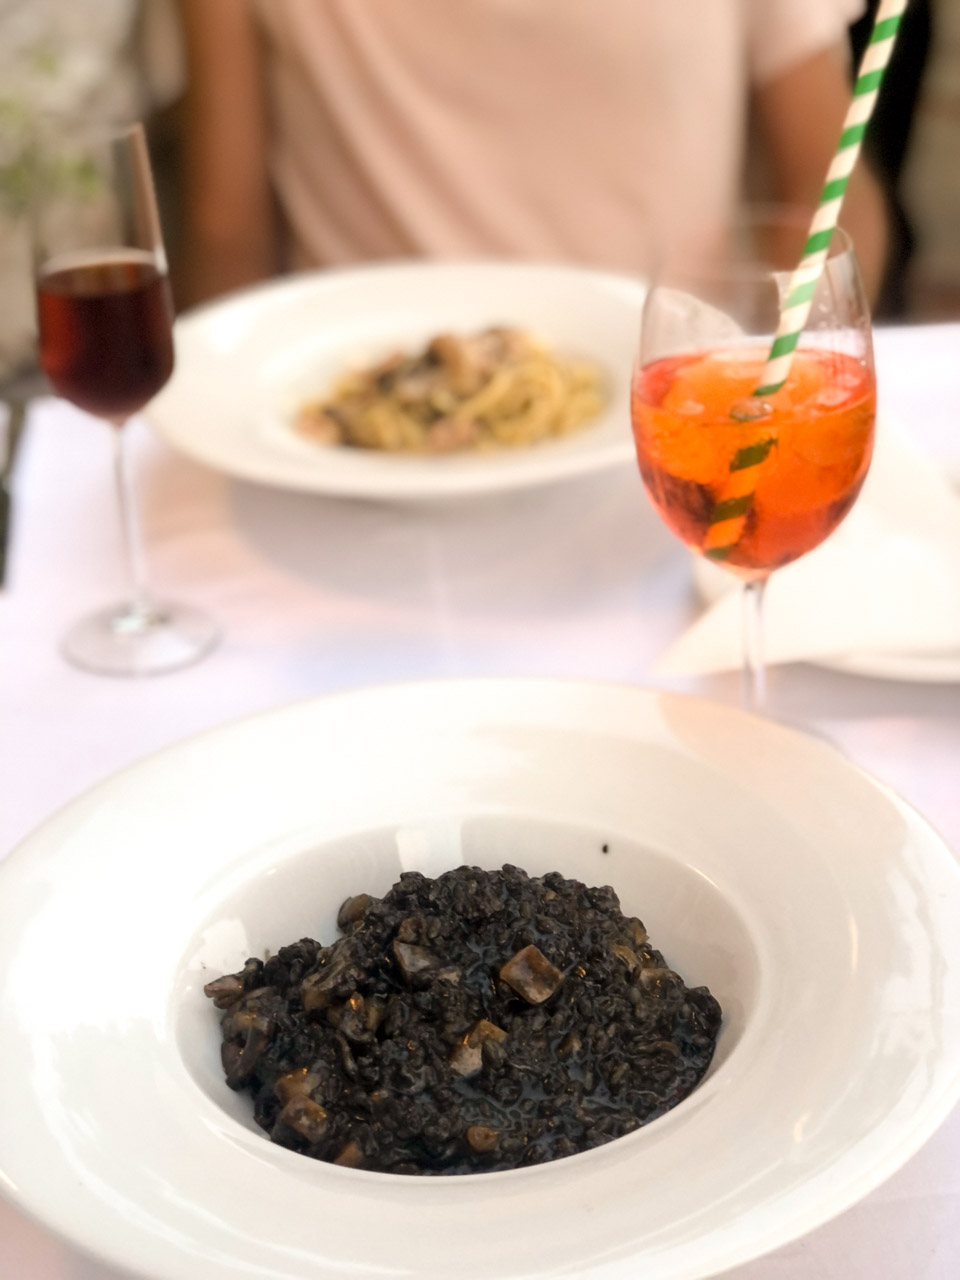 Plates of black risotto and truffle pasta on a table next to an Aperol Spritz and a glass of Prošek wine